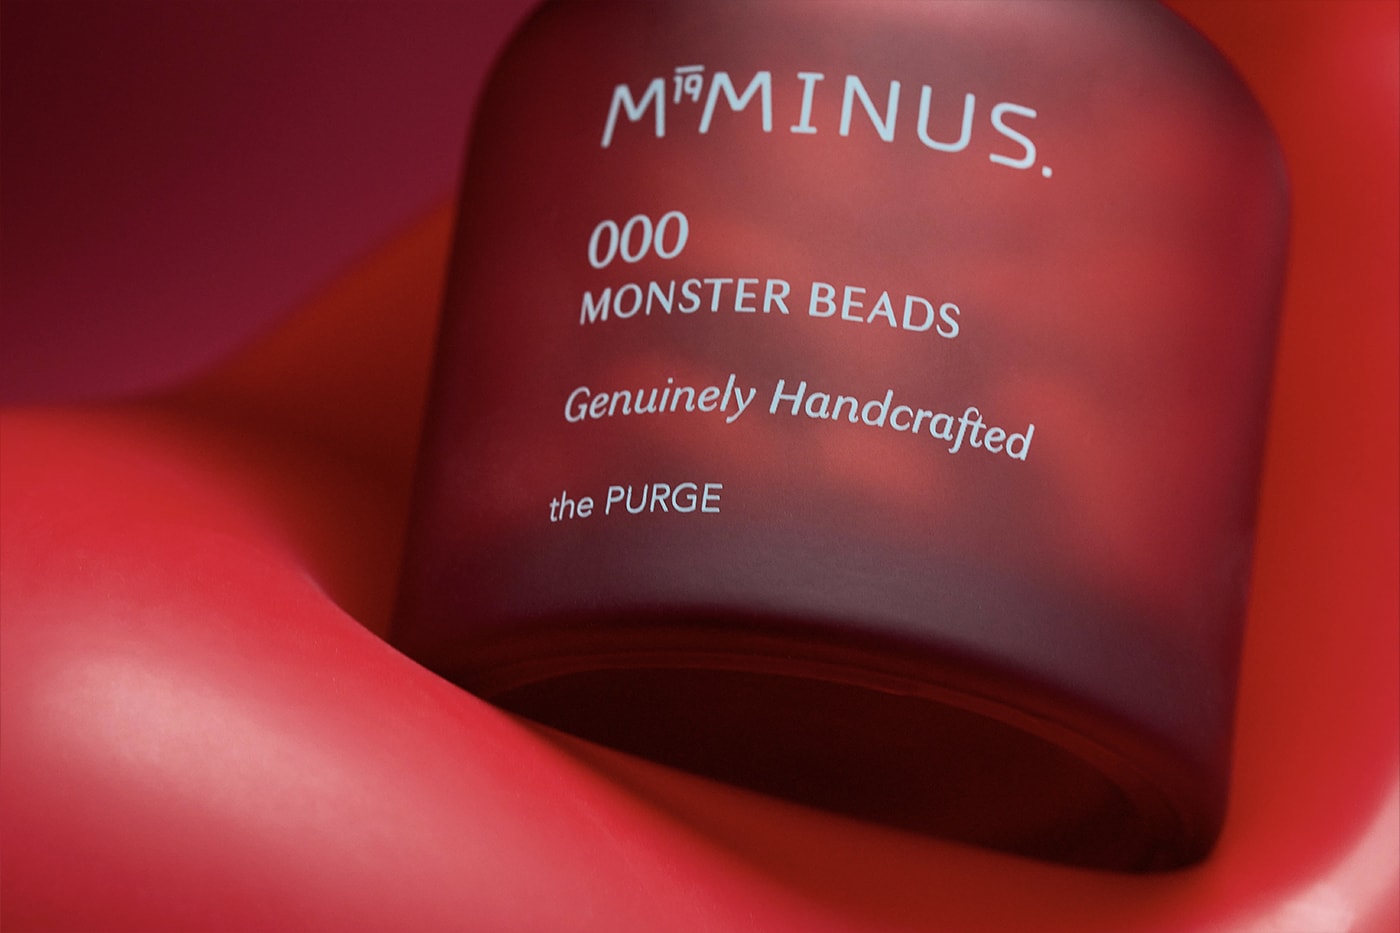 M19Minus the PURGE 000 MONSTER BEADS Cleansing Beads Release Info Buy Price 